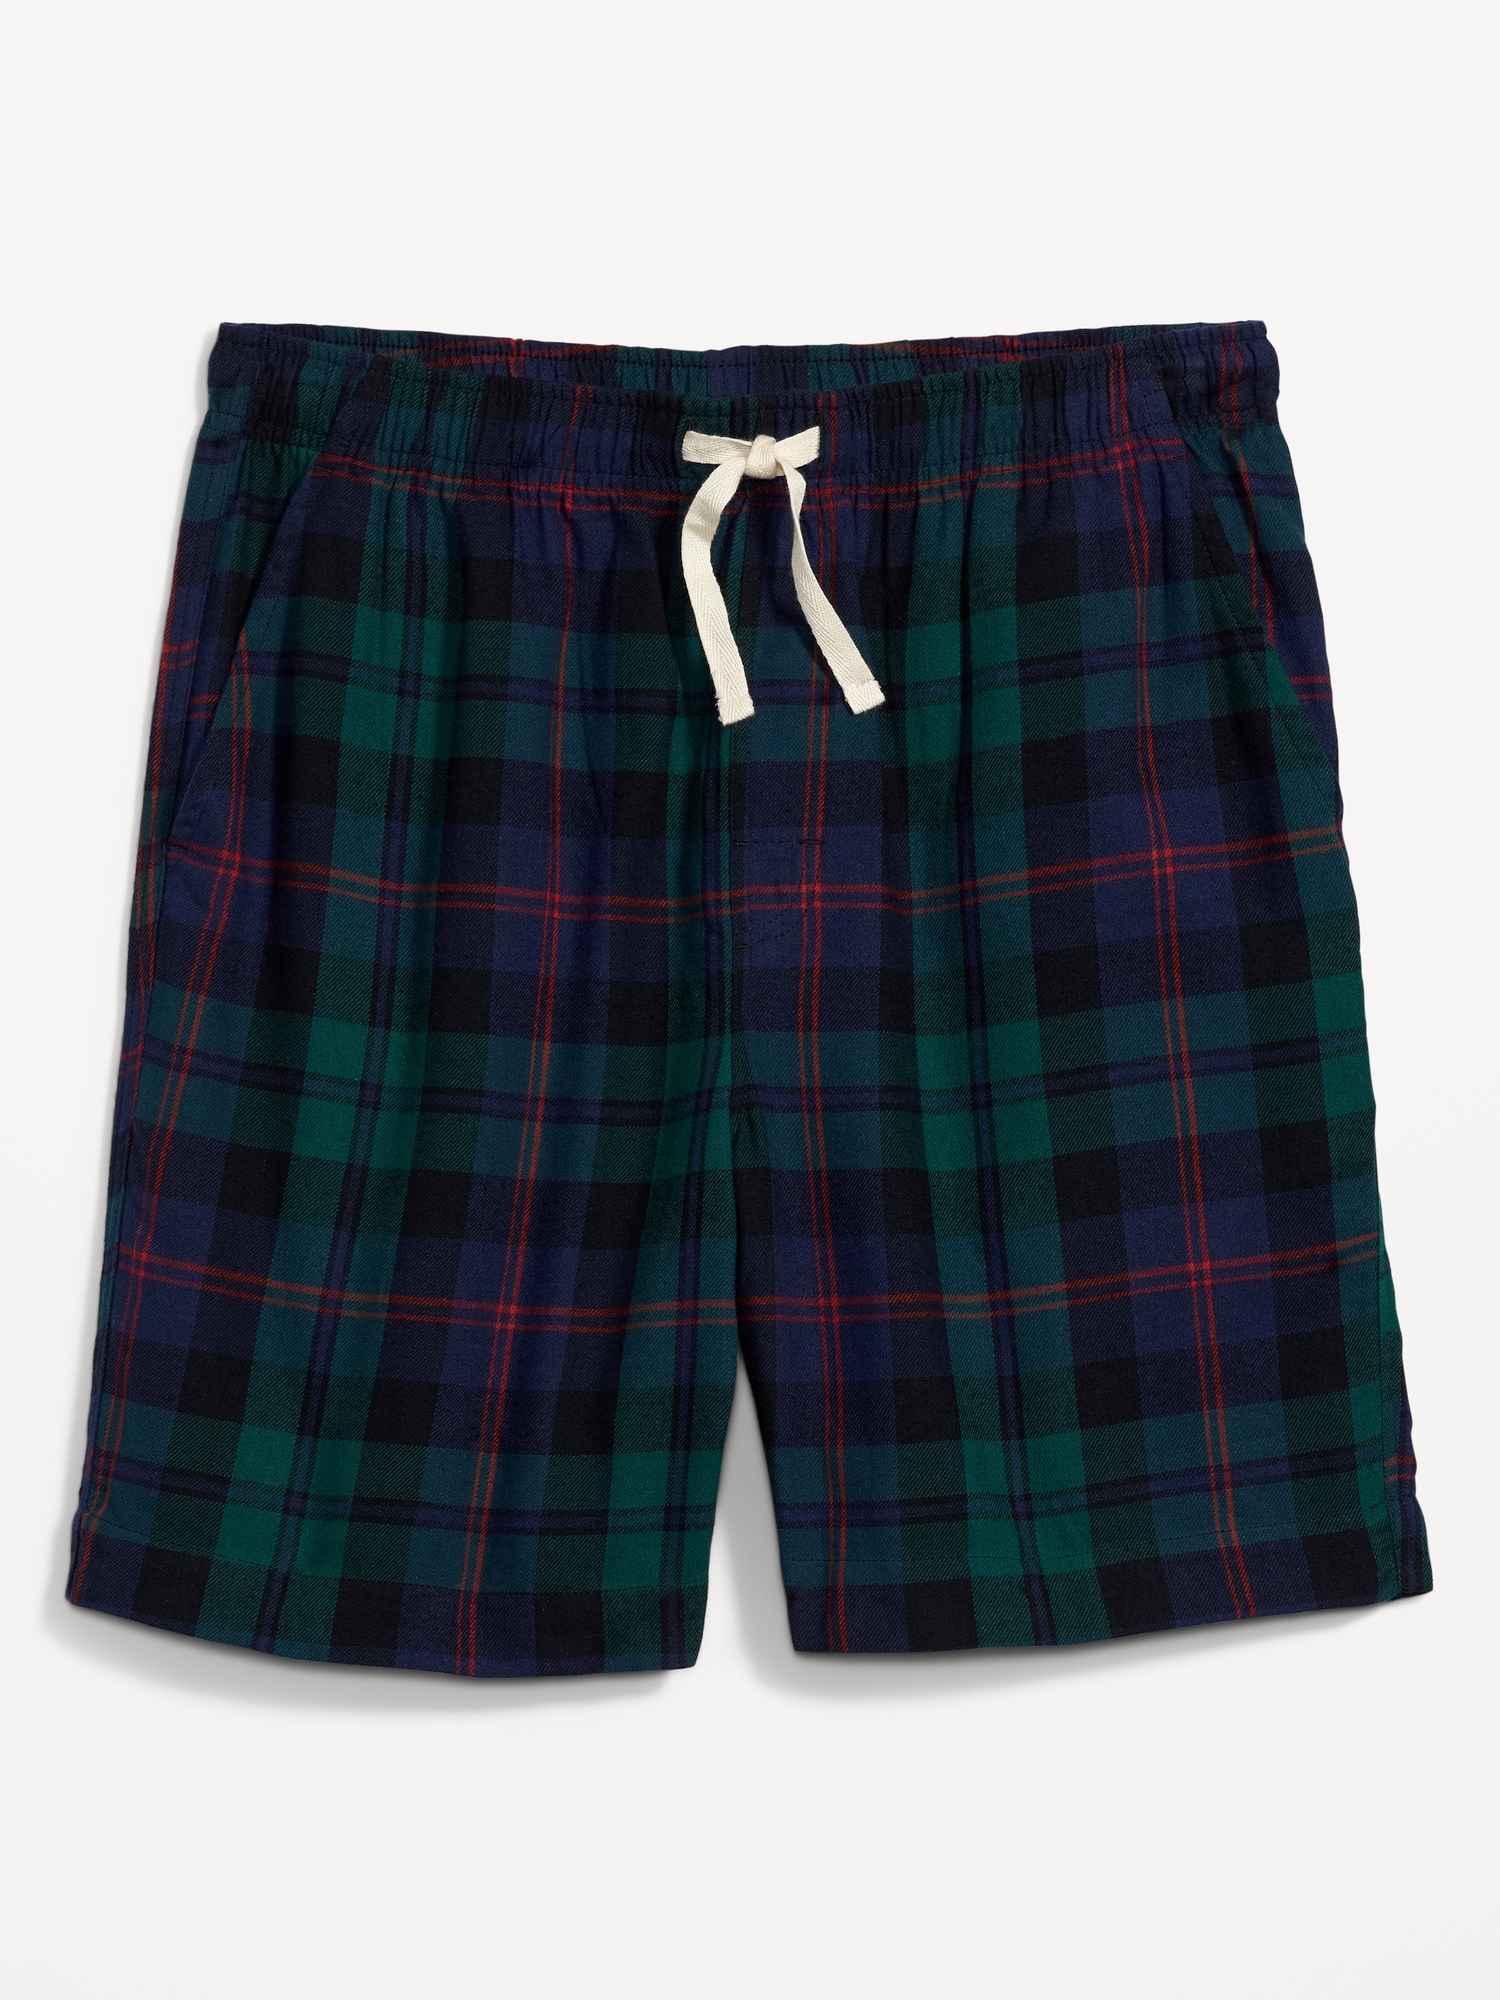 Matching Printed Flannel Pajama Shorts for Men -- 7-inch inseam | Old Navy